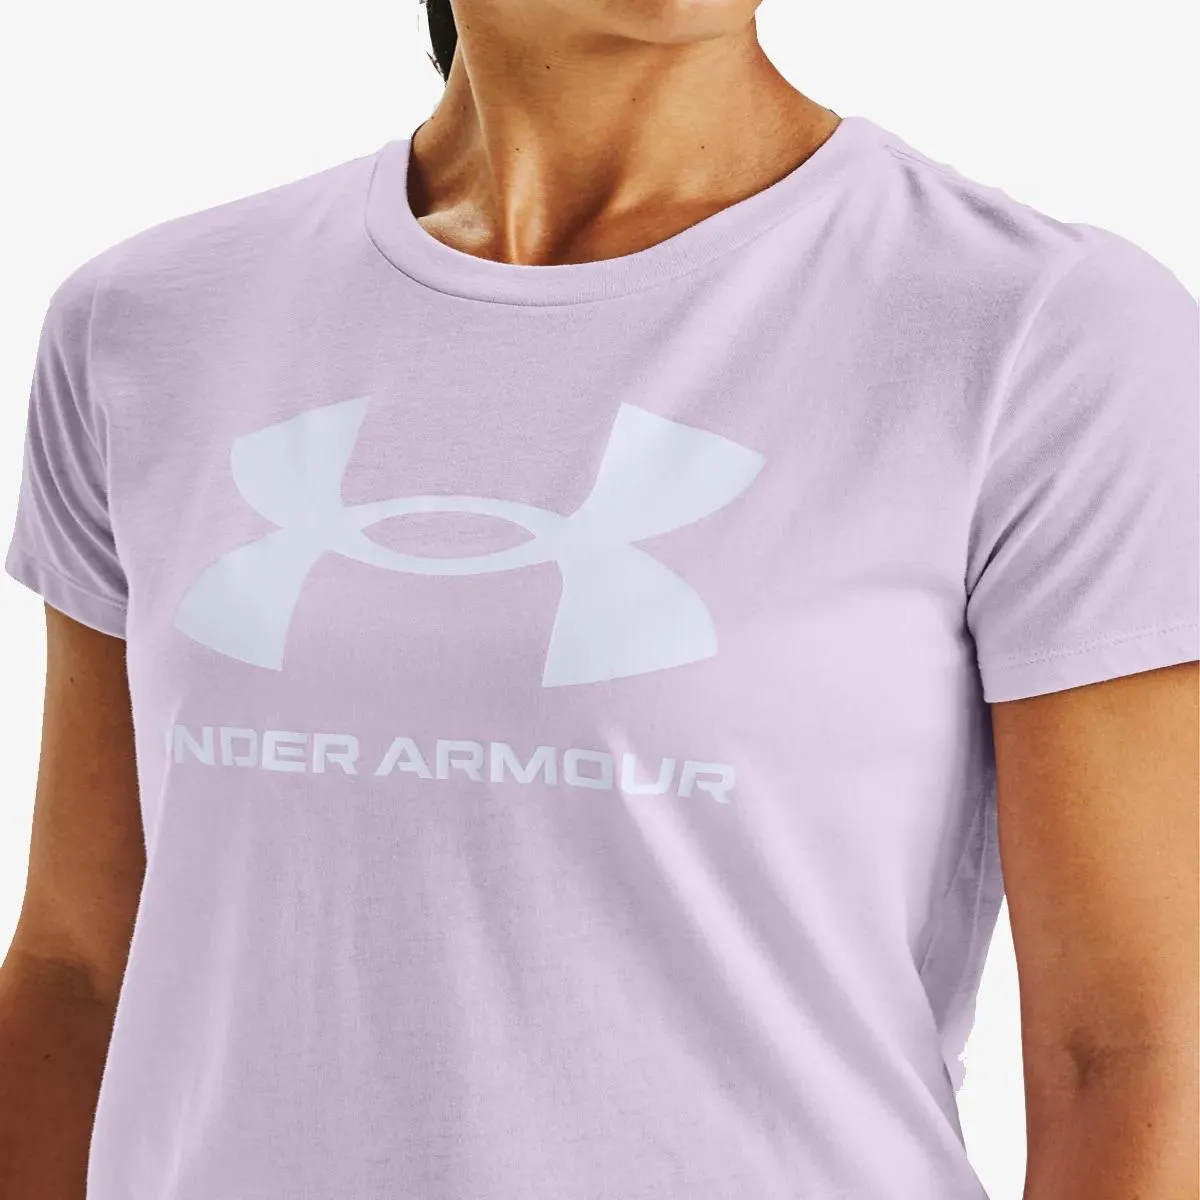 Under Armour T-shirt Live Sportstyle Graphic SSC 